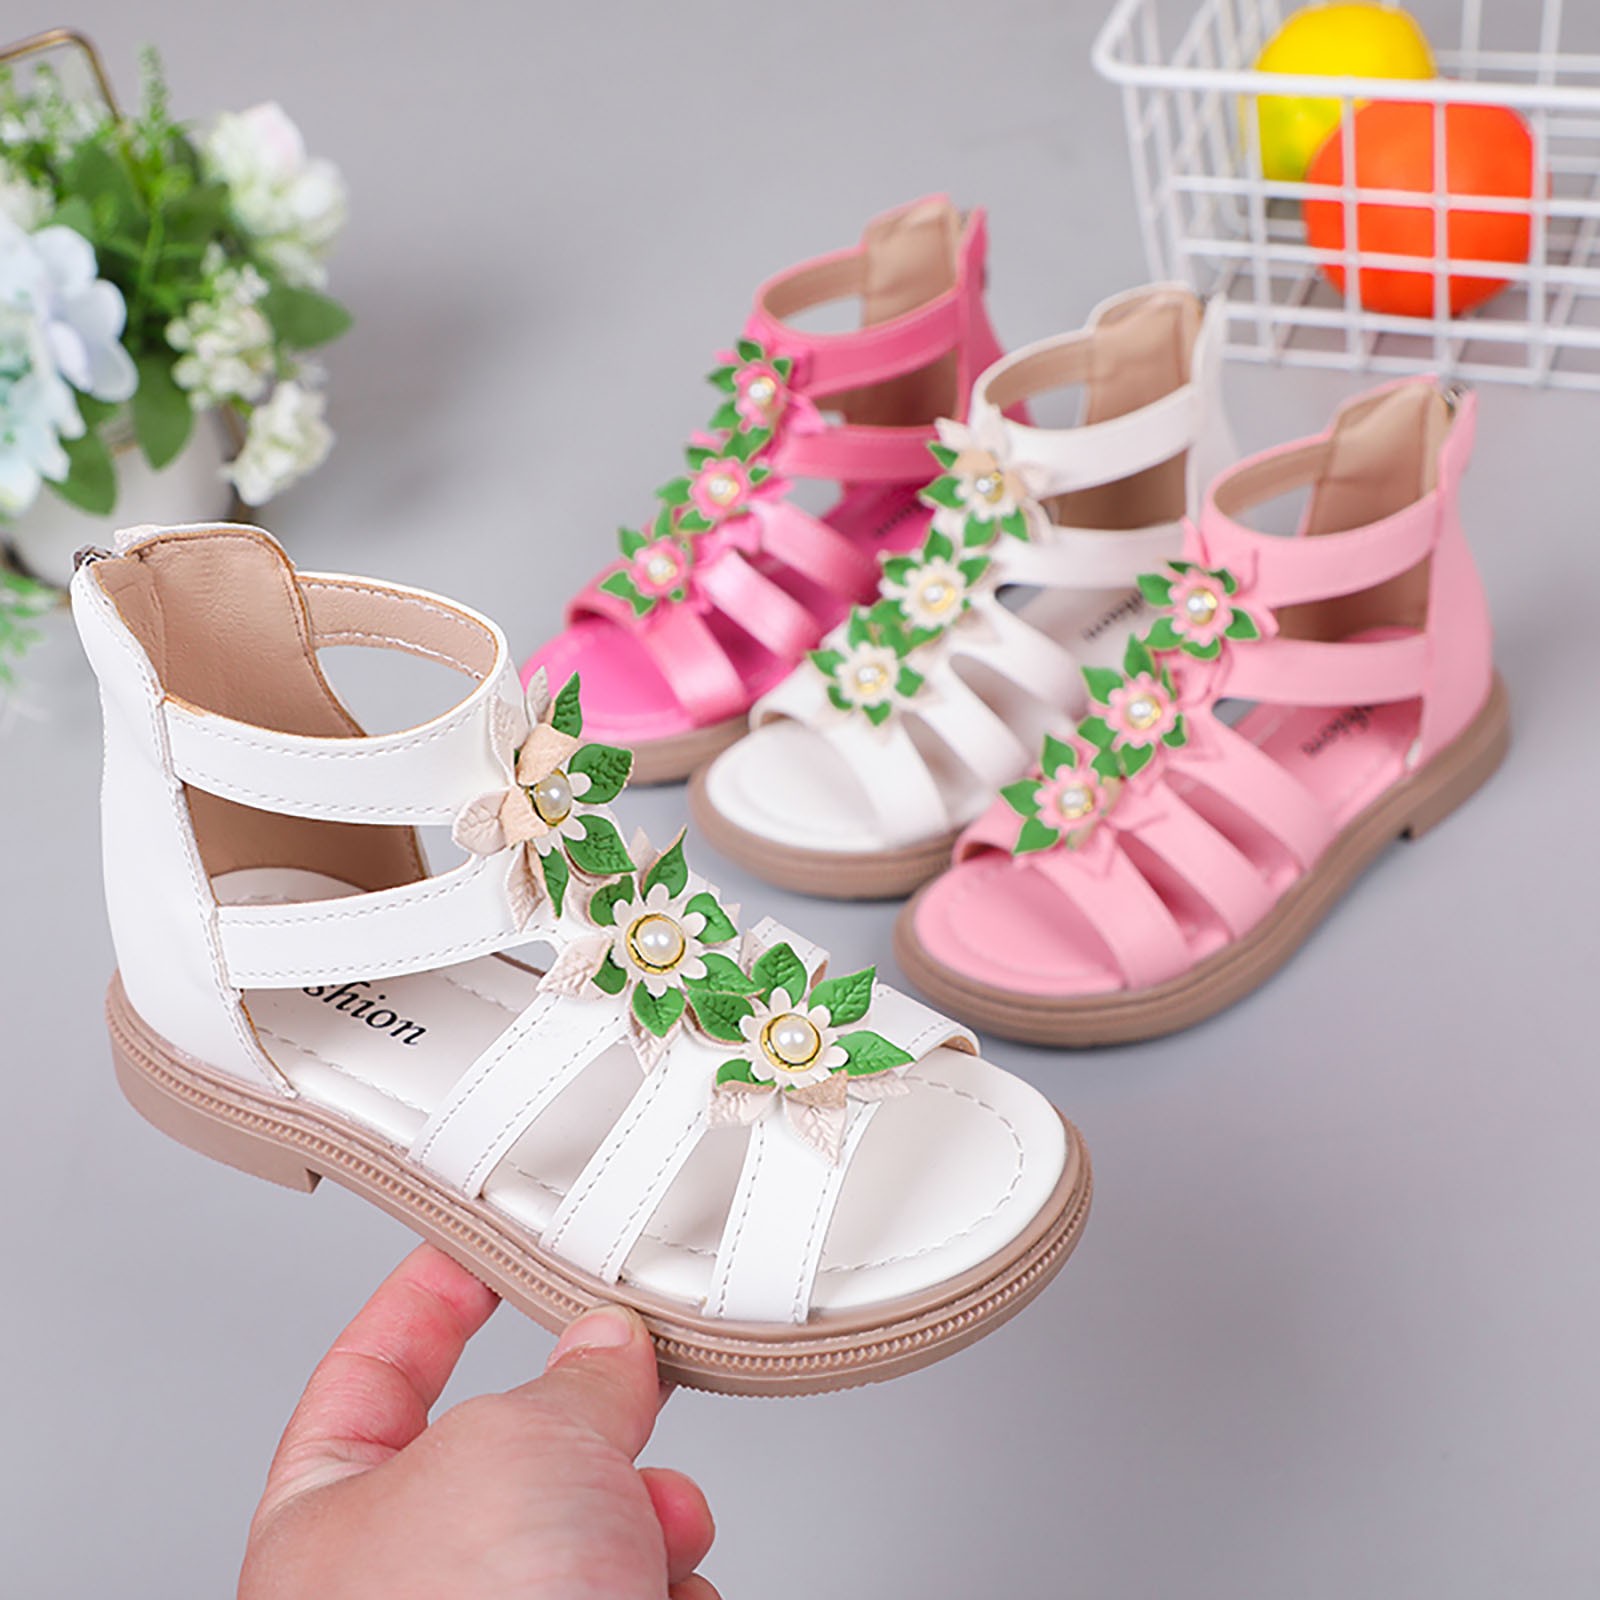  Adorable Girls High Top Sandals with Floral